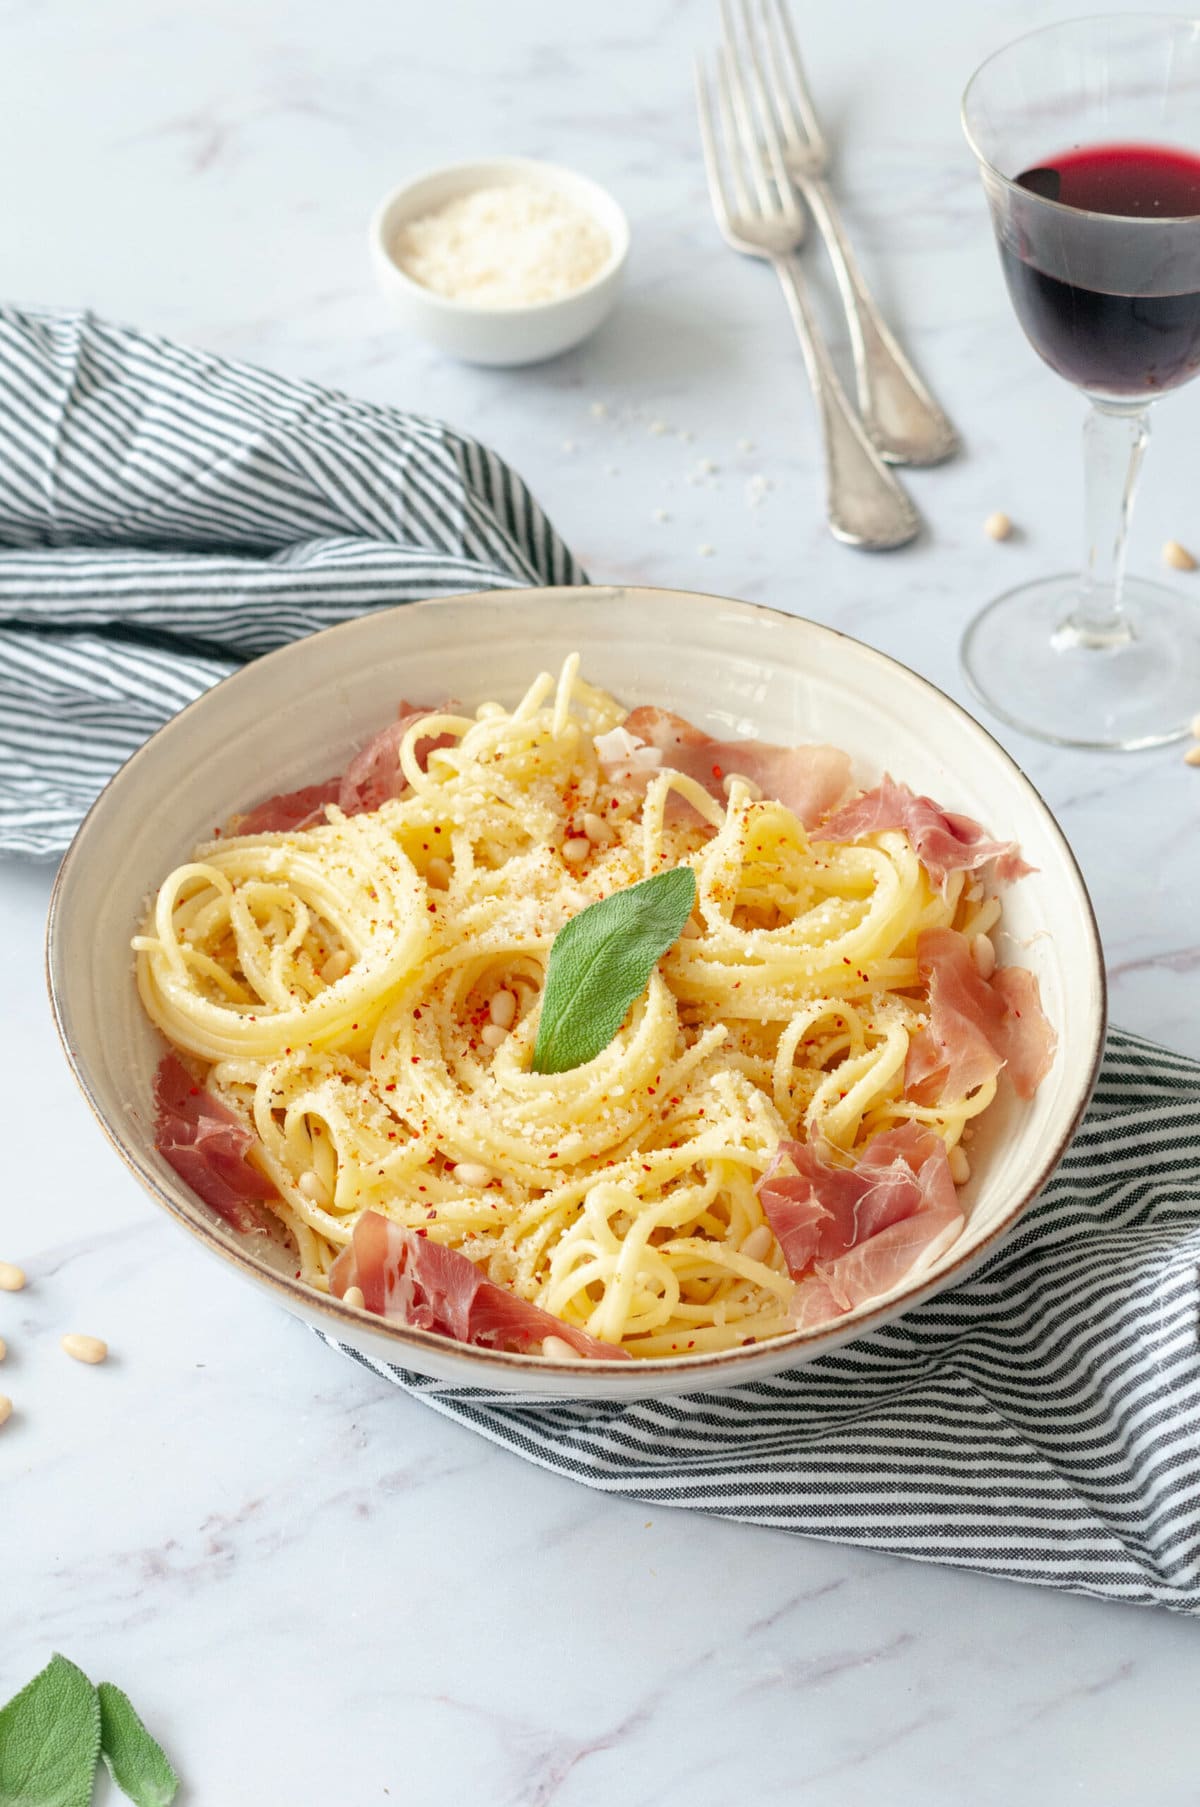 Pasta with sage butter in a bowl with a napkin, a glass of wine and Parmesan cheese.